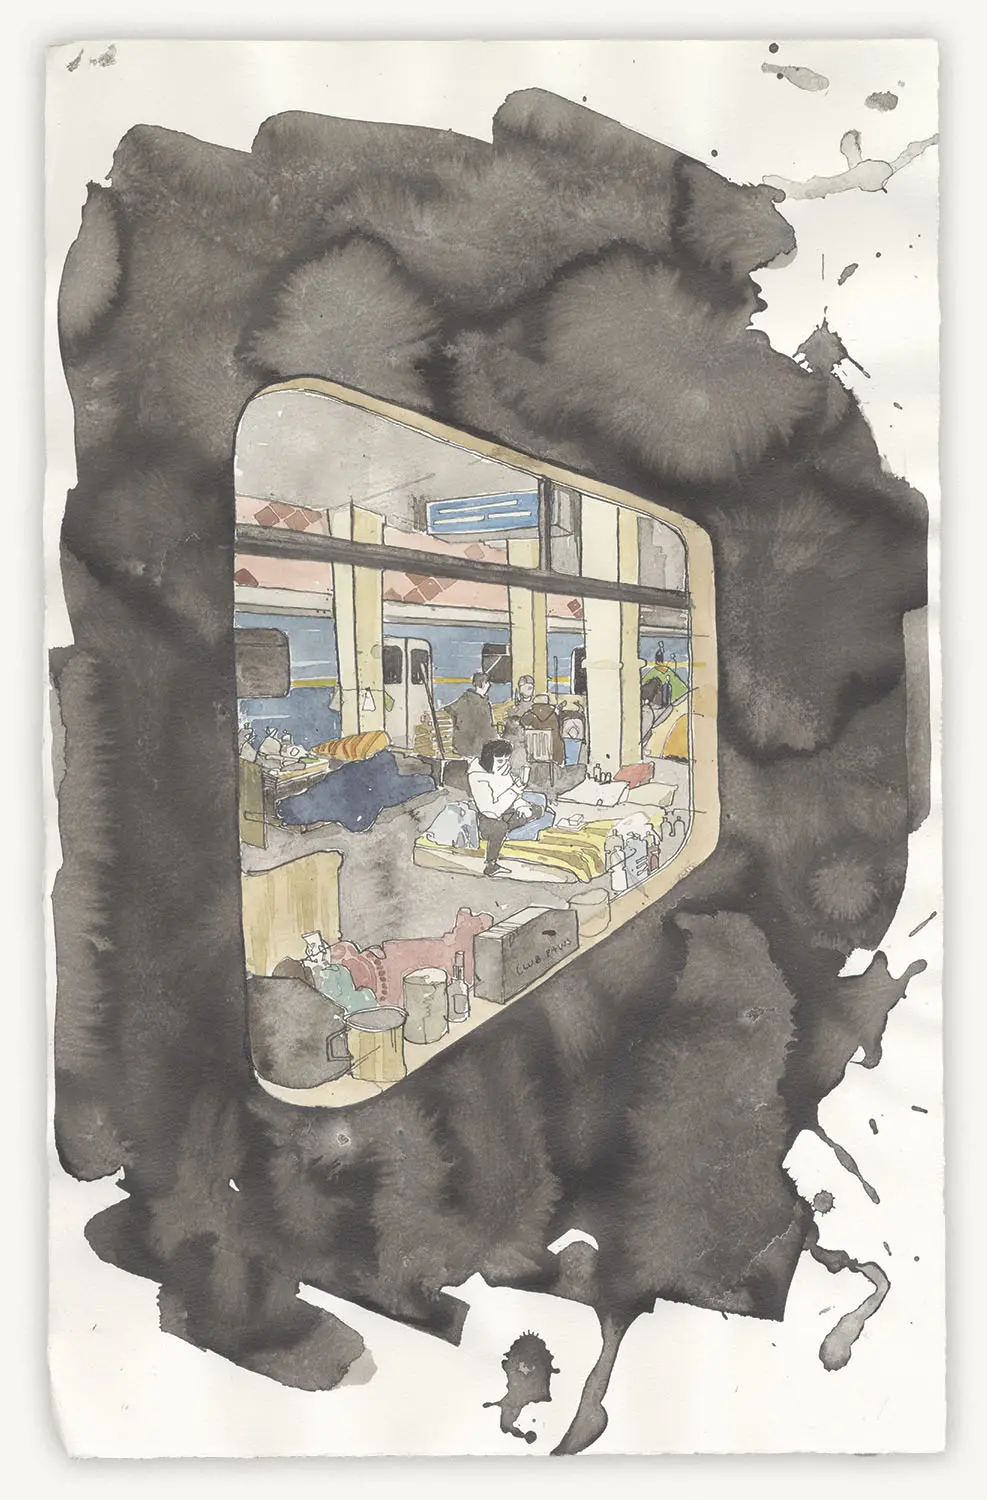 Illustration of a view of the train station settlement from inside the rail car. Looking through the window, one sees a young person checking their phone on a mattress, people laying under blankets and reading, and household items placed on the window sill. The scene is well lit. 